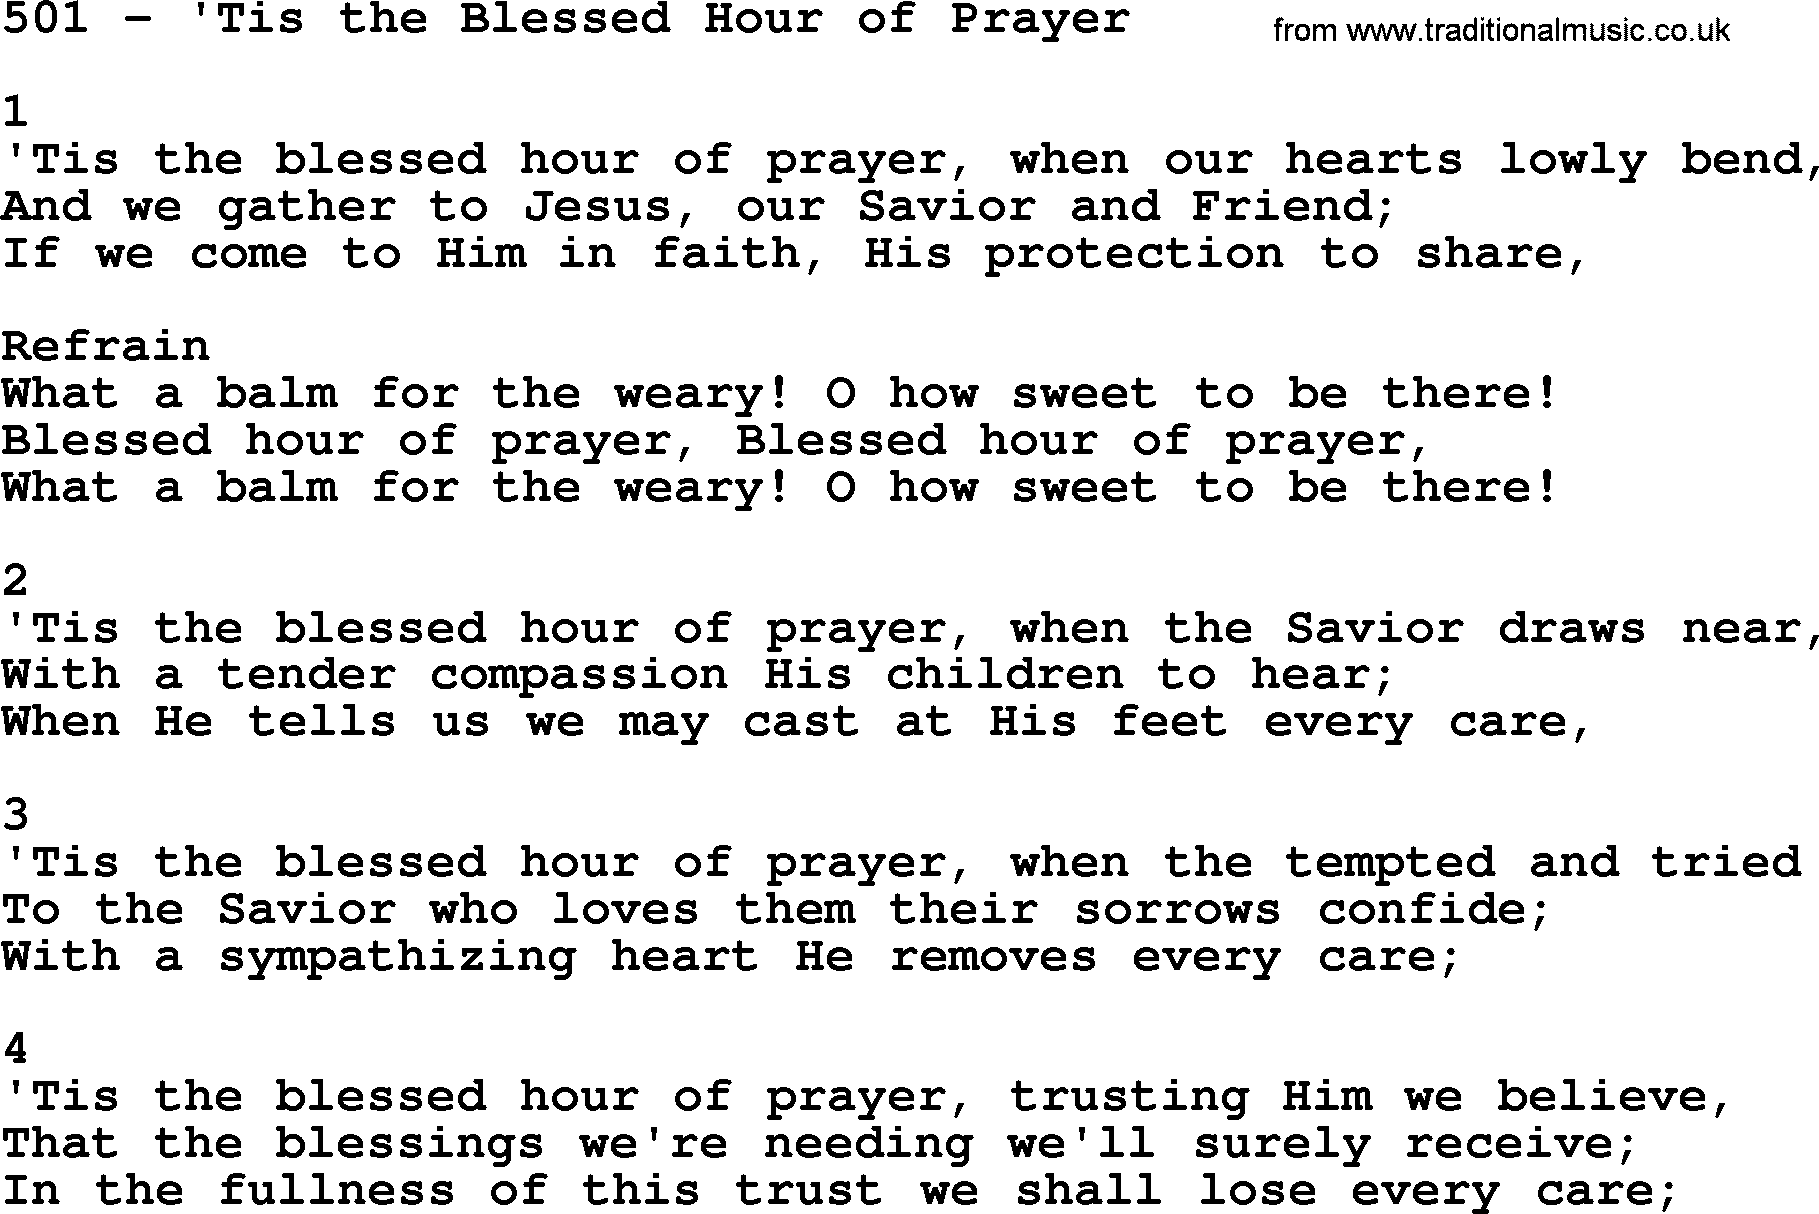 Complete Adventis Hymnal, title: 501-'Tis The Blessed Hour Of Prayer, with lyrics, midi, mp3, powerpoints(PPT) and PDF,